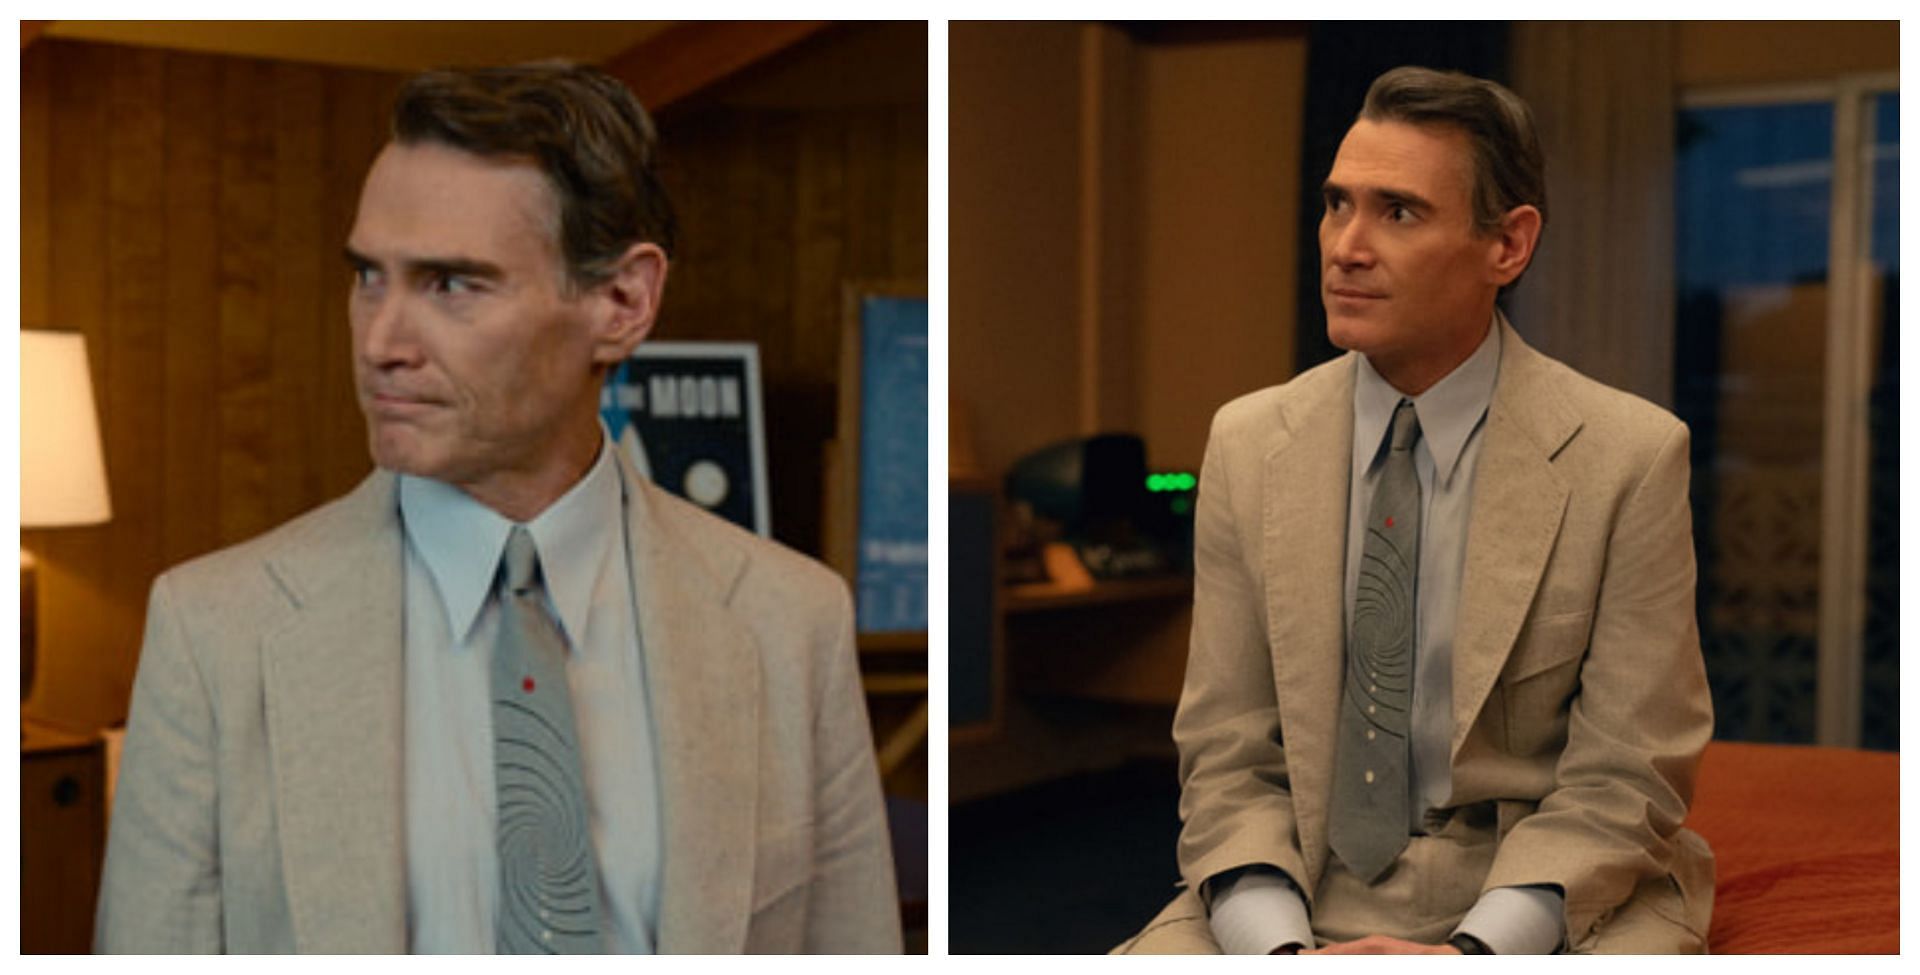 Billy Crudup as Jack Billings (Pictures from Apple Press site)